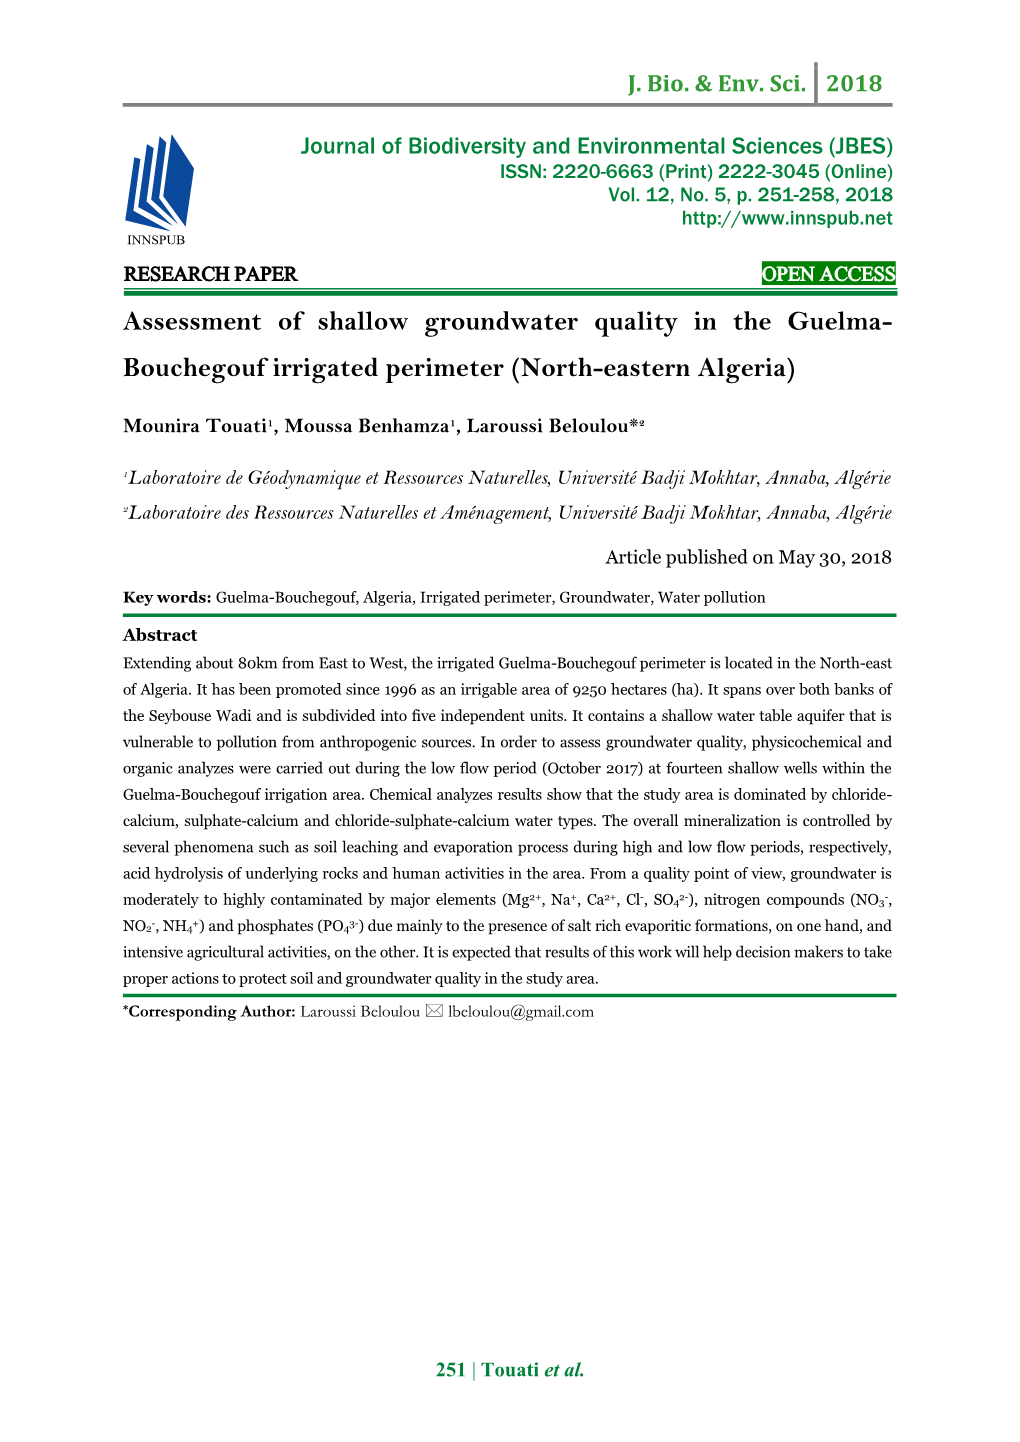 Assessment of Shallow Groundwater Quality in the Guelma- Bouchegouf Irrigated Perimeter (North-Eastern Algeria)